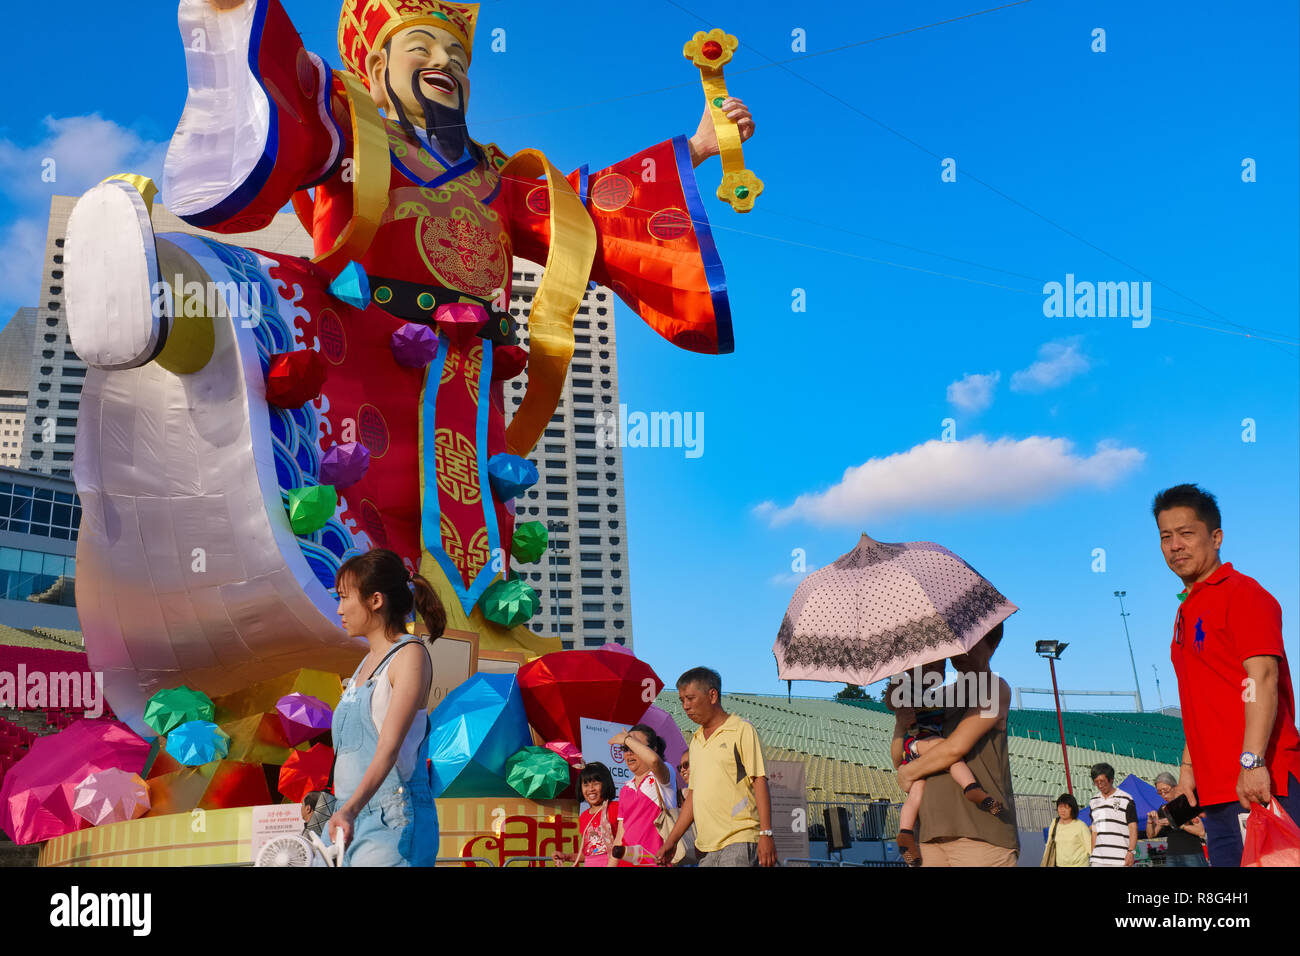 The cheerful figure of the Chinese god of good fortune, put up for Chinese New Year, by Marina Bay, Singapore Stock Photo